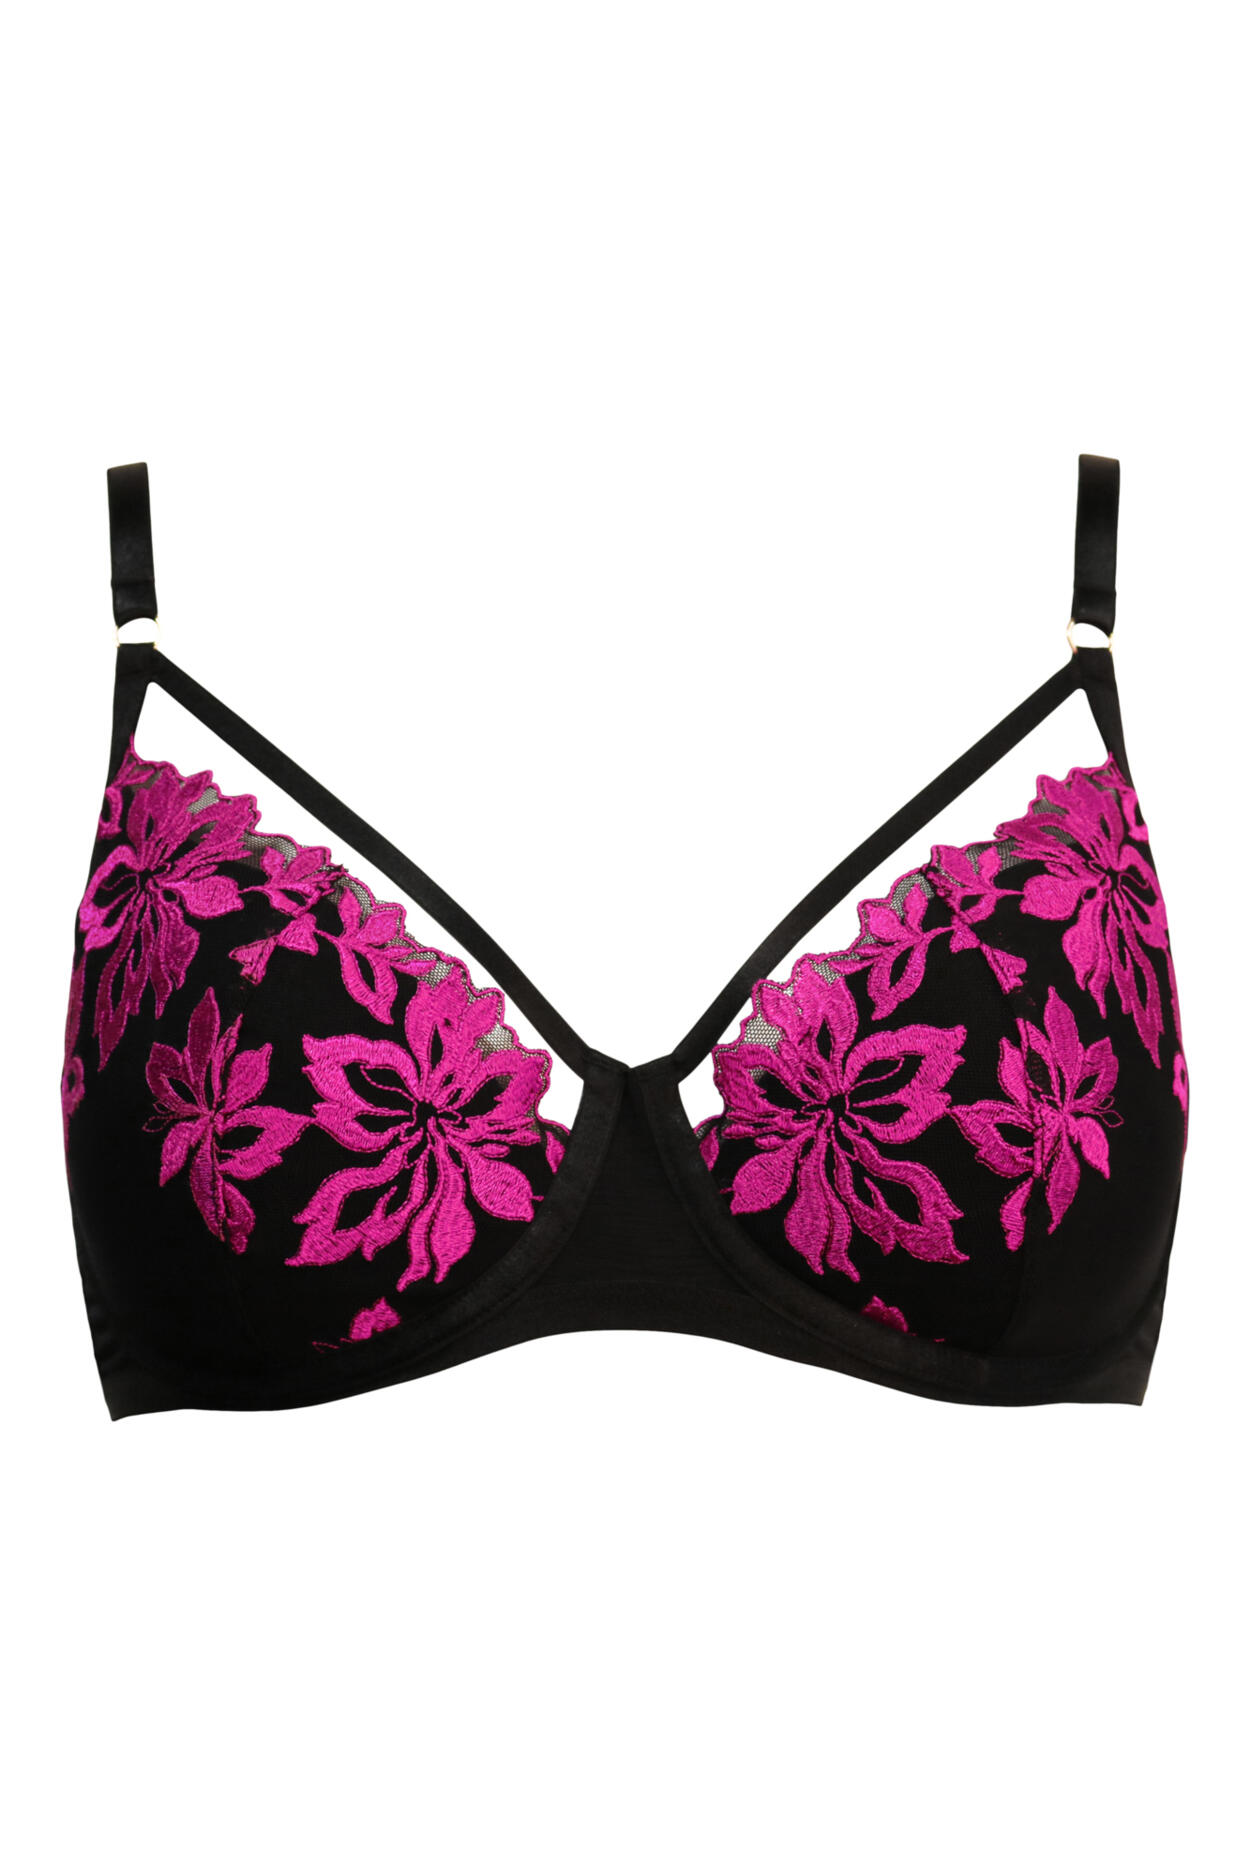 Roxie Embroidered Strapped Lightly Padded Bra in Black/Hot Pink | Pour Moi